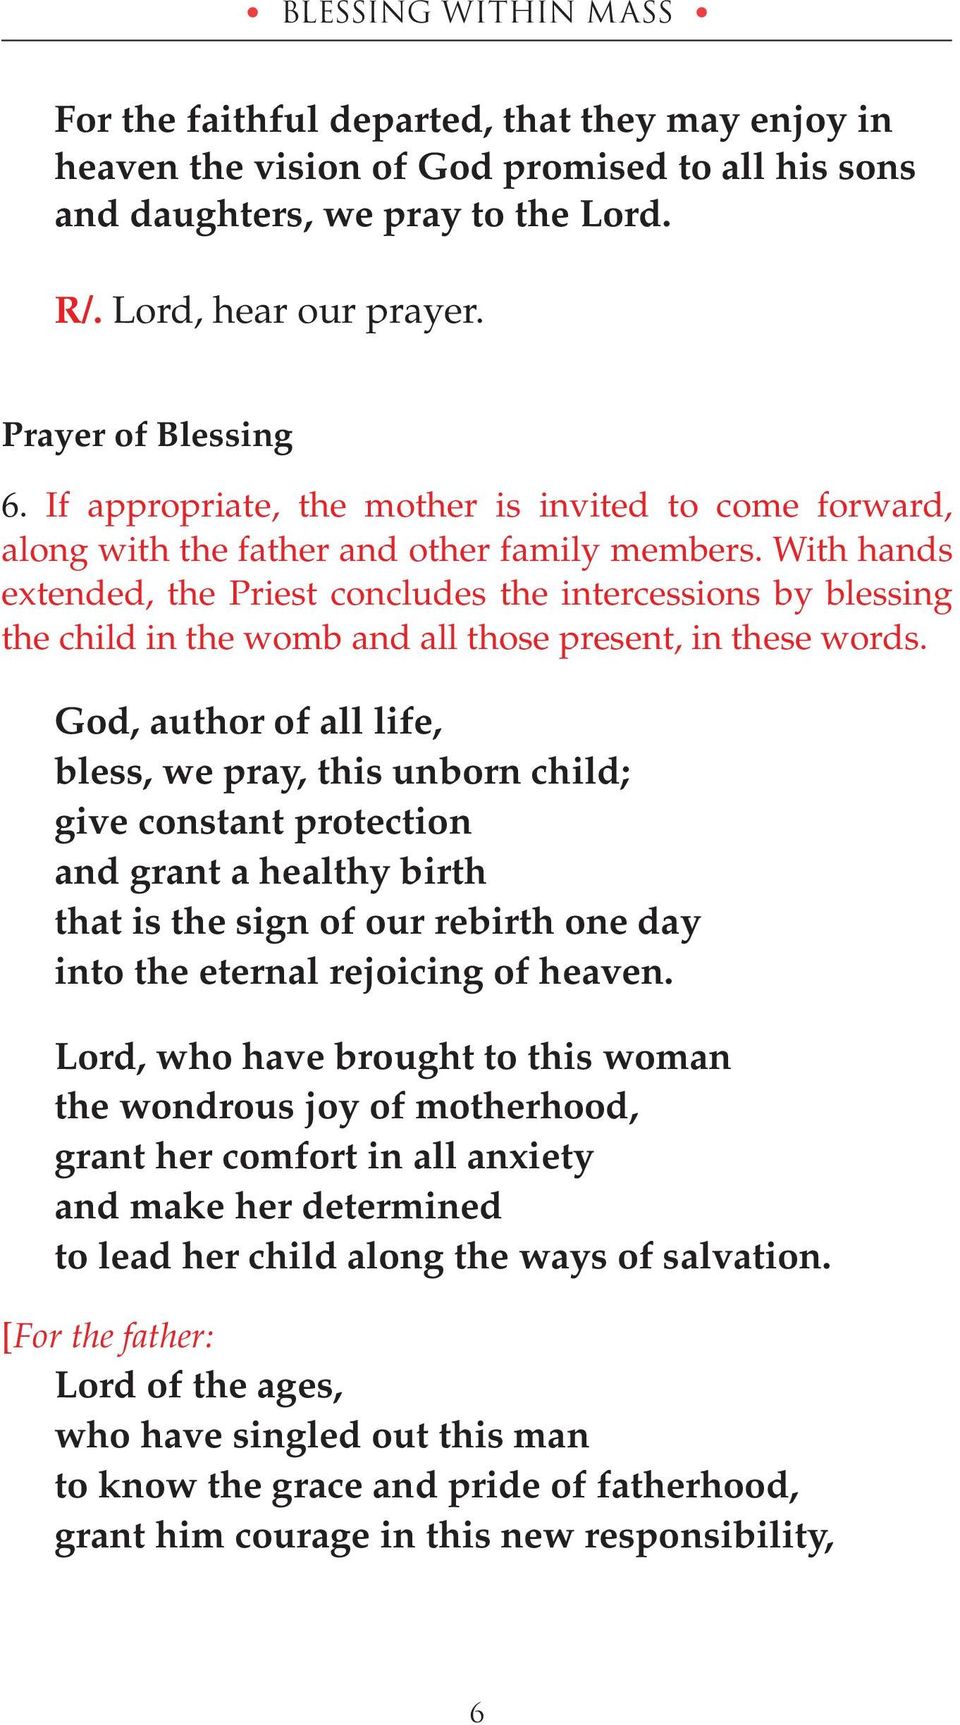 With hands extended, the Priest concludes the intercessions by blessing the child in the womb and all those present, in these words.